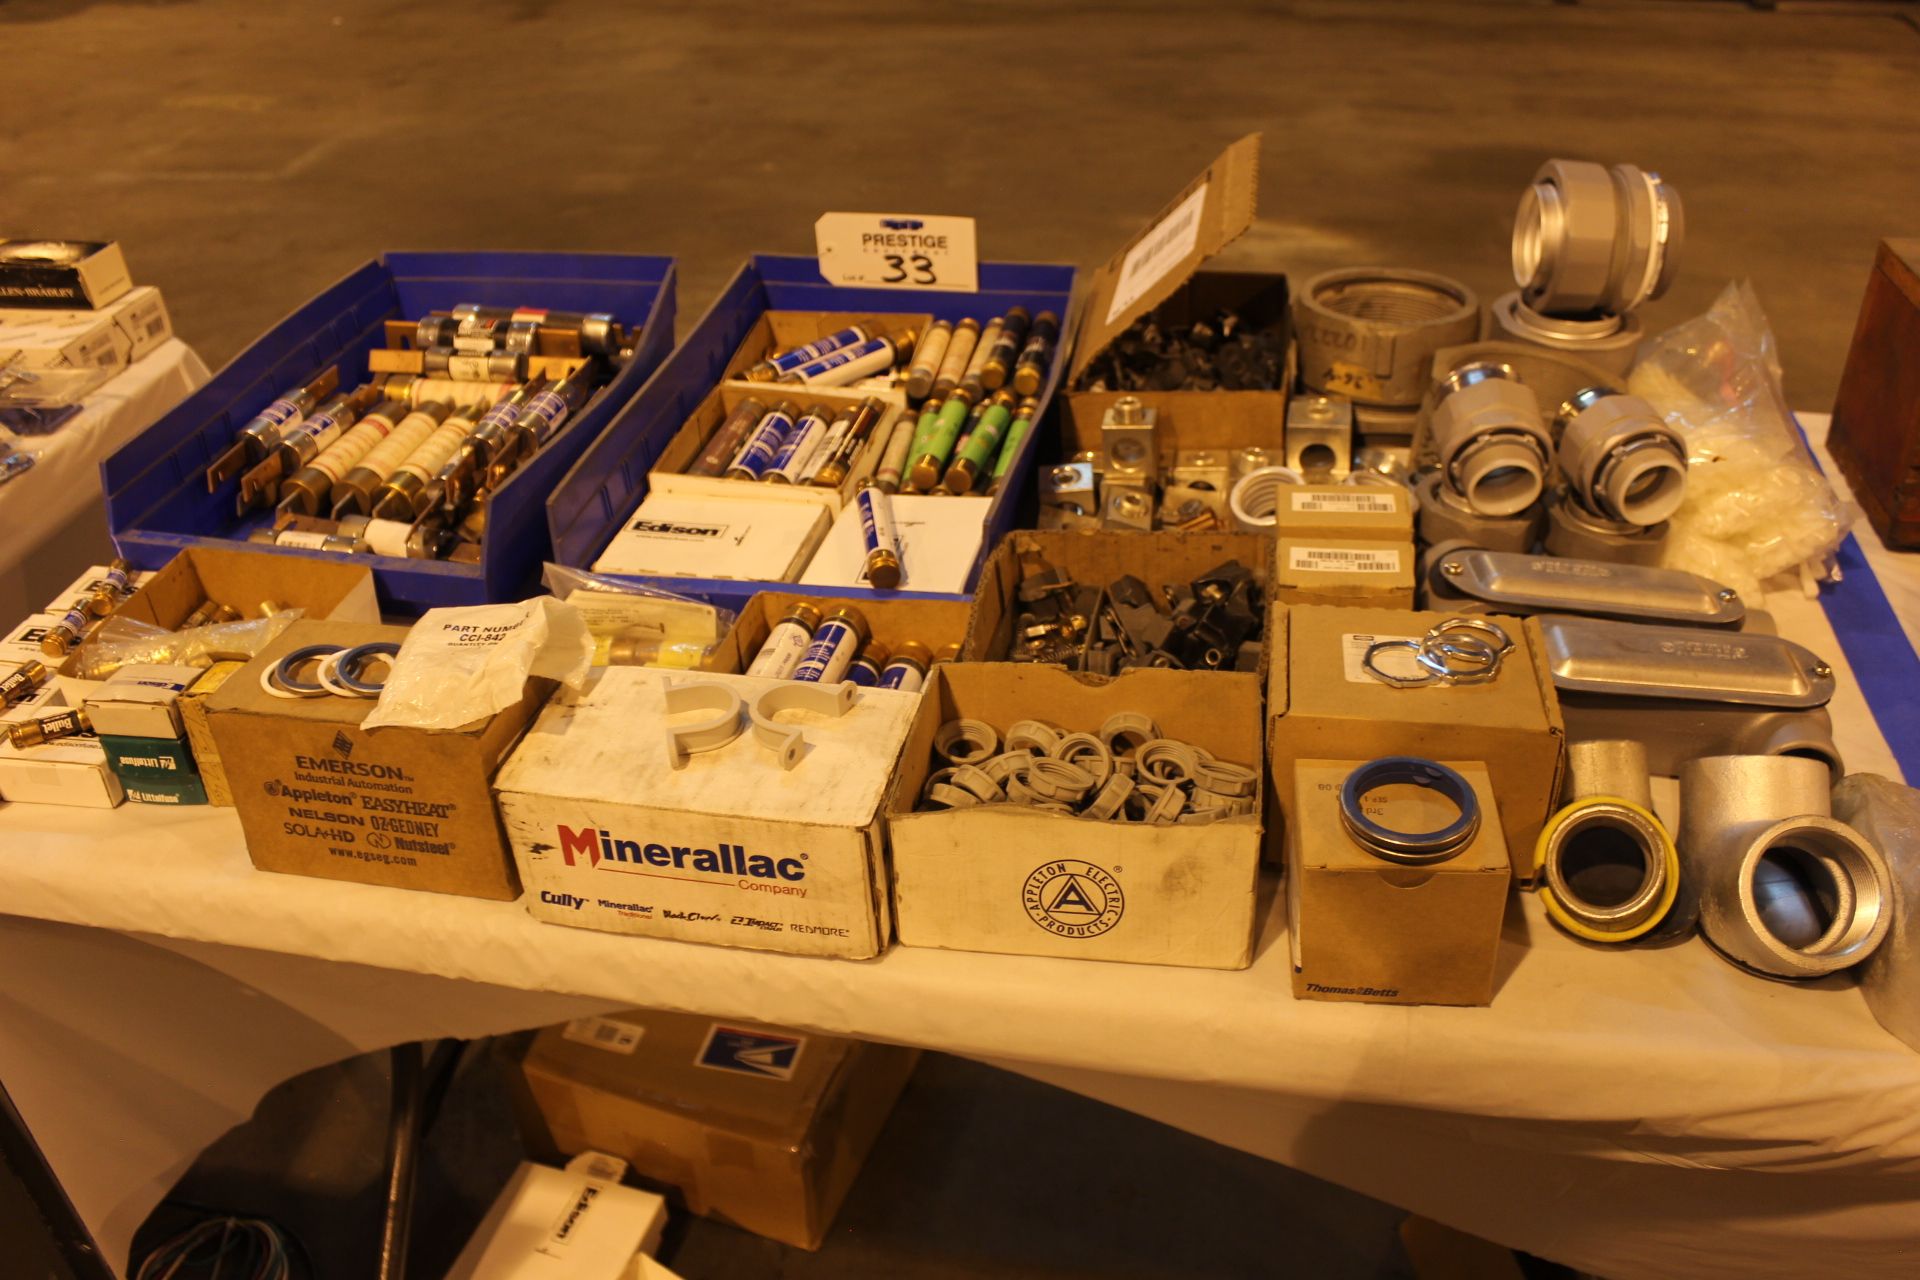 Lot of Fuses, Fittings, Sealing Rings, Bushings, Conduit Clamps, Cable Straps, Wire Ties